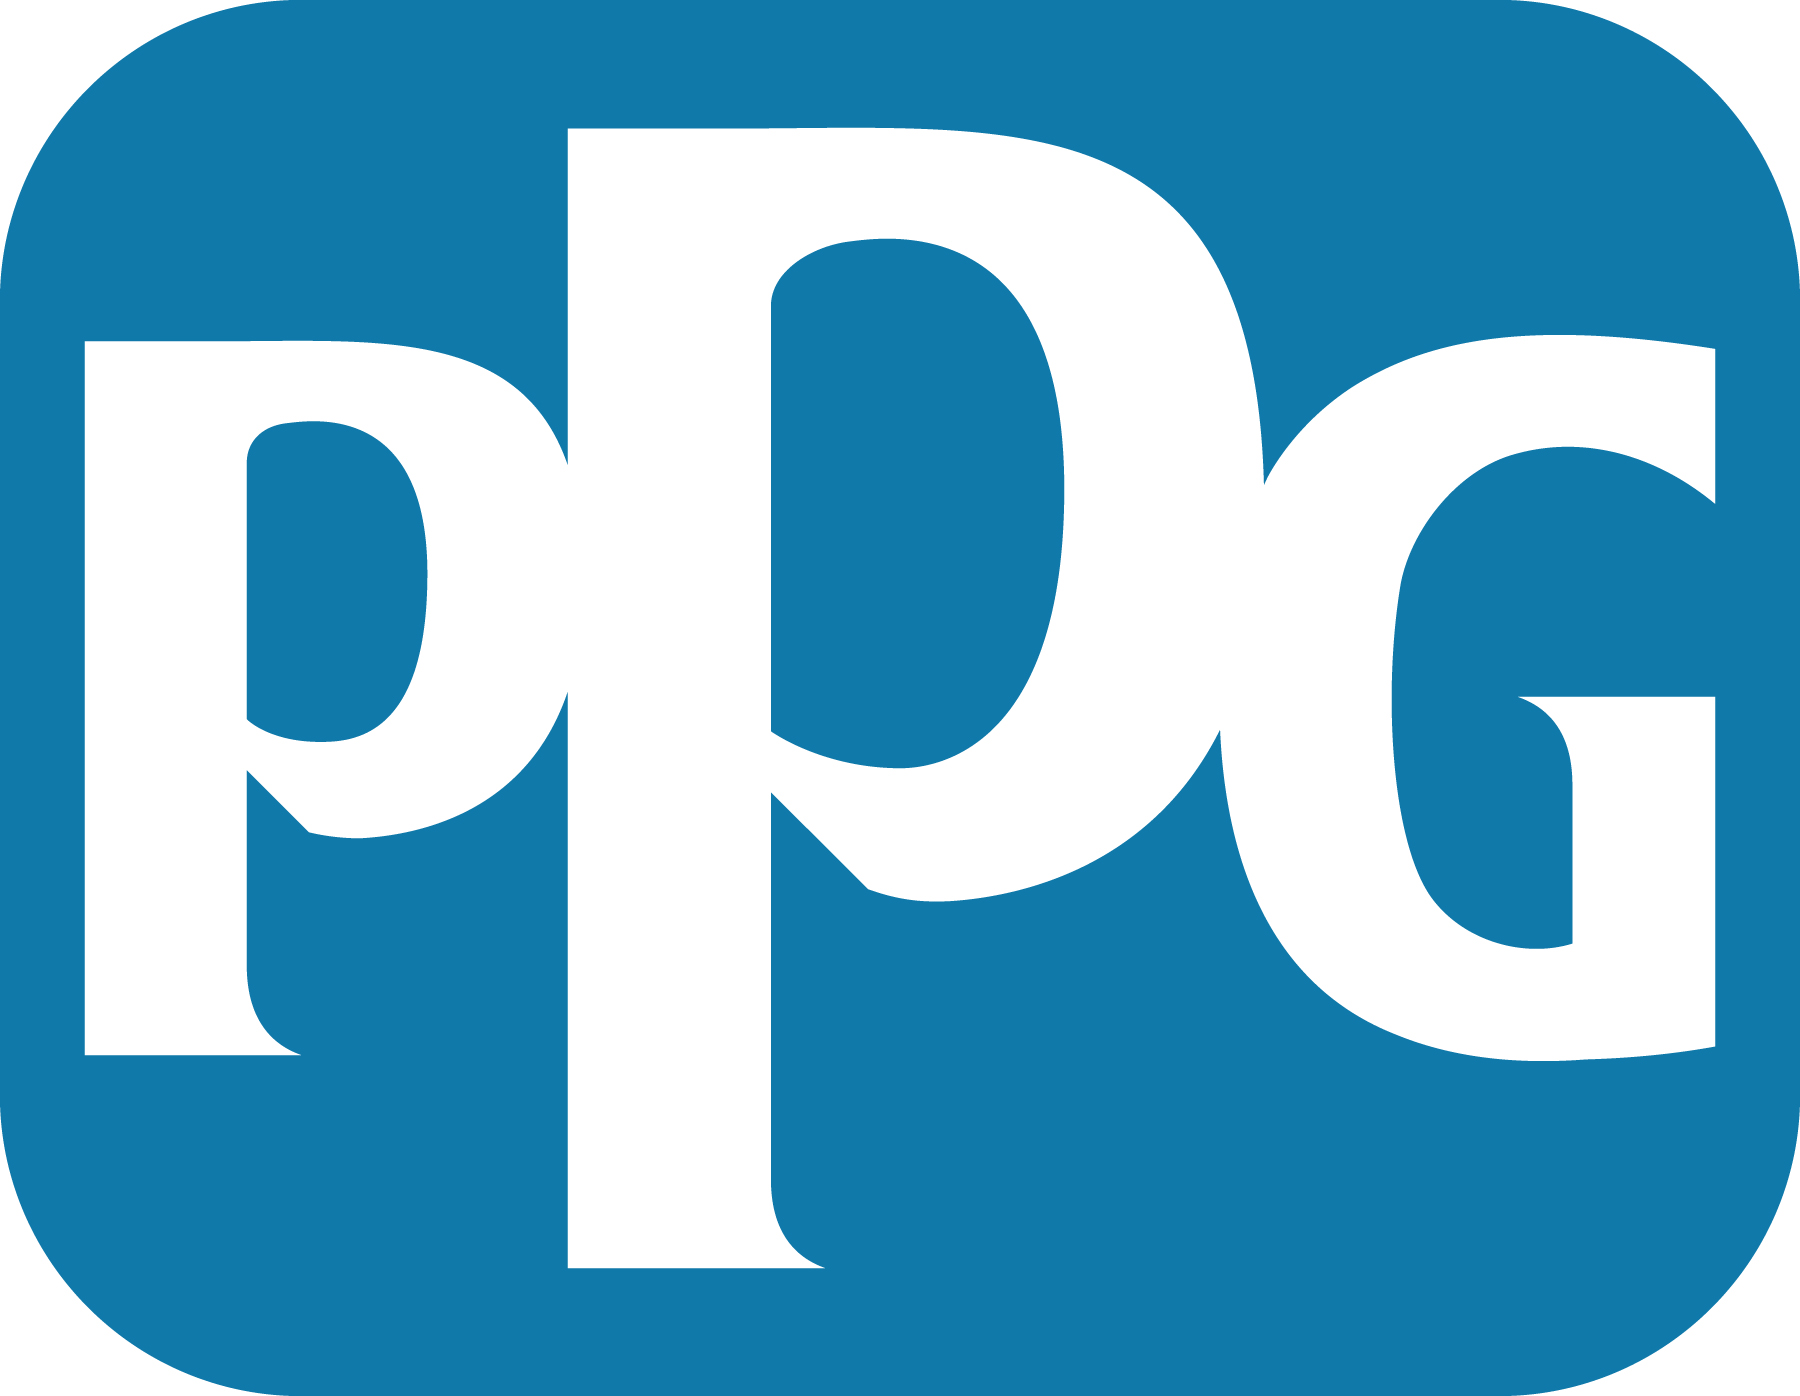 ppg2